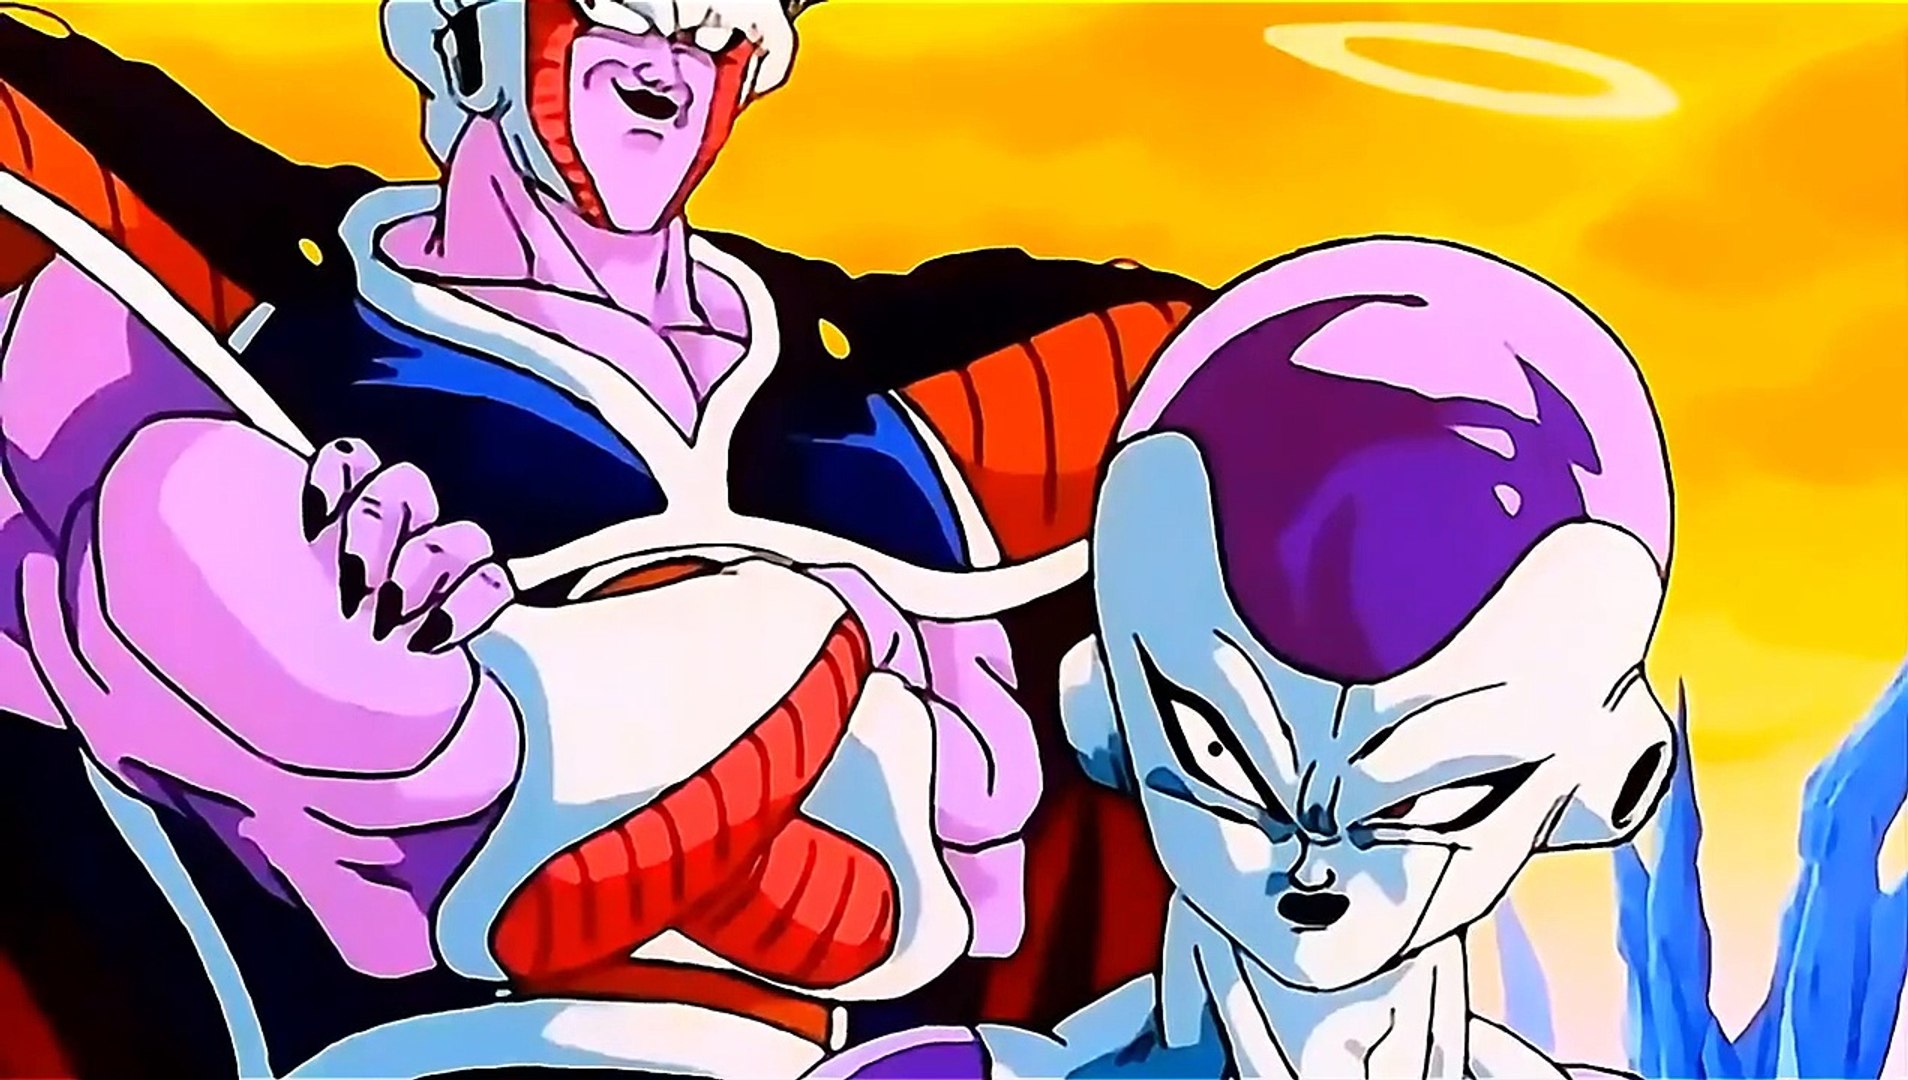 Goku And Pikkon Vs. Cell, Frieza, And The Ginyu Force In Hell (1080p) HD -  Dailymotion Video